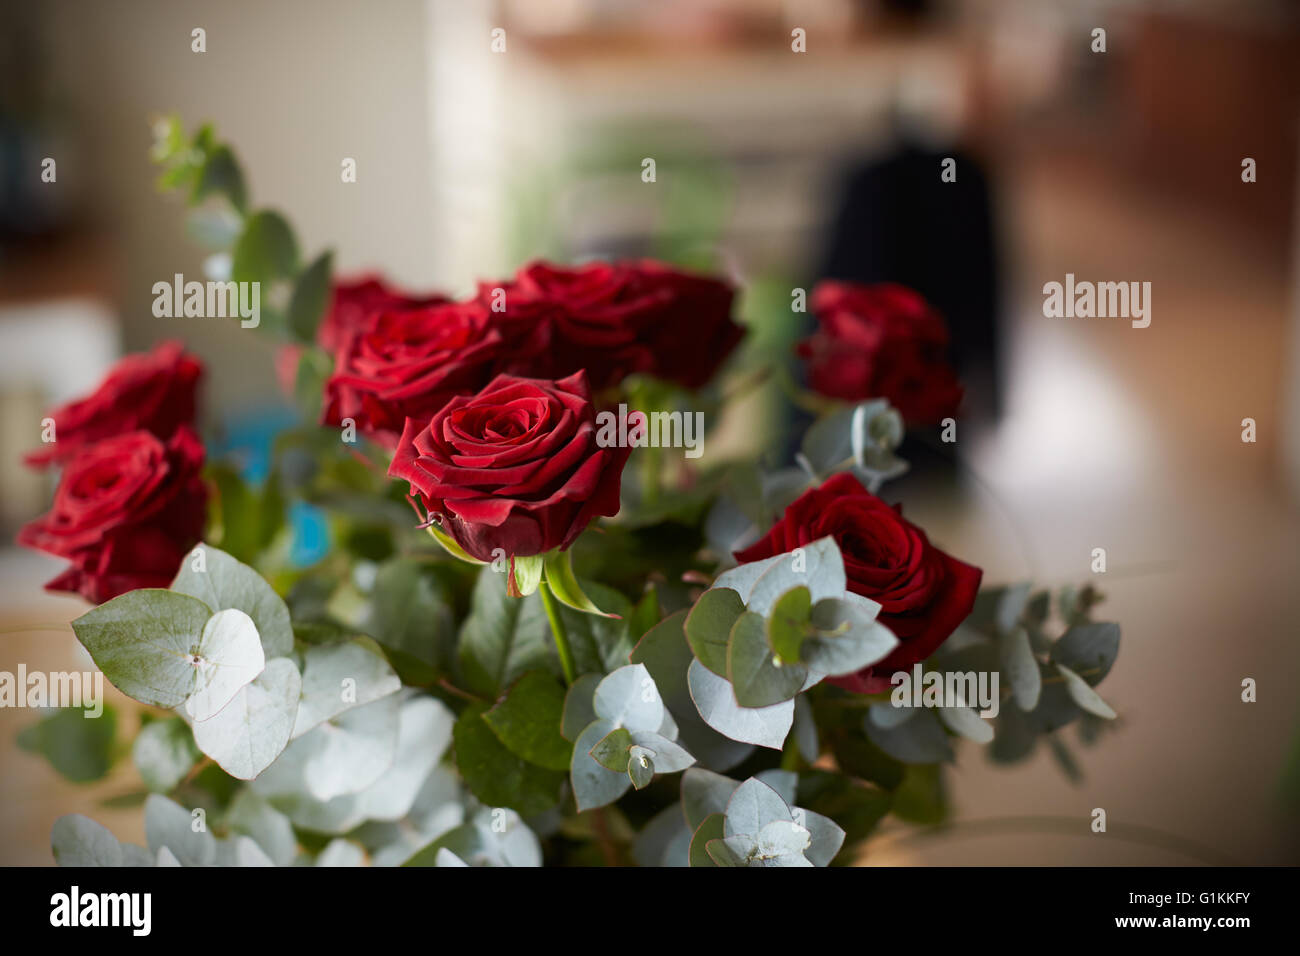 Arrangement Of Red Roses On Table Stock Photo